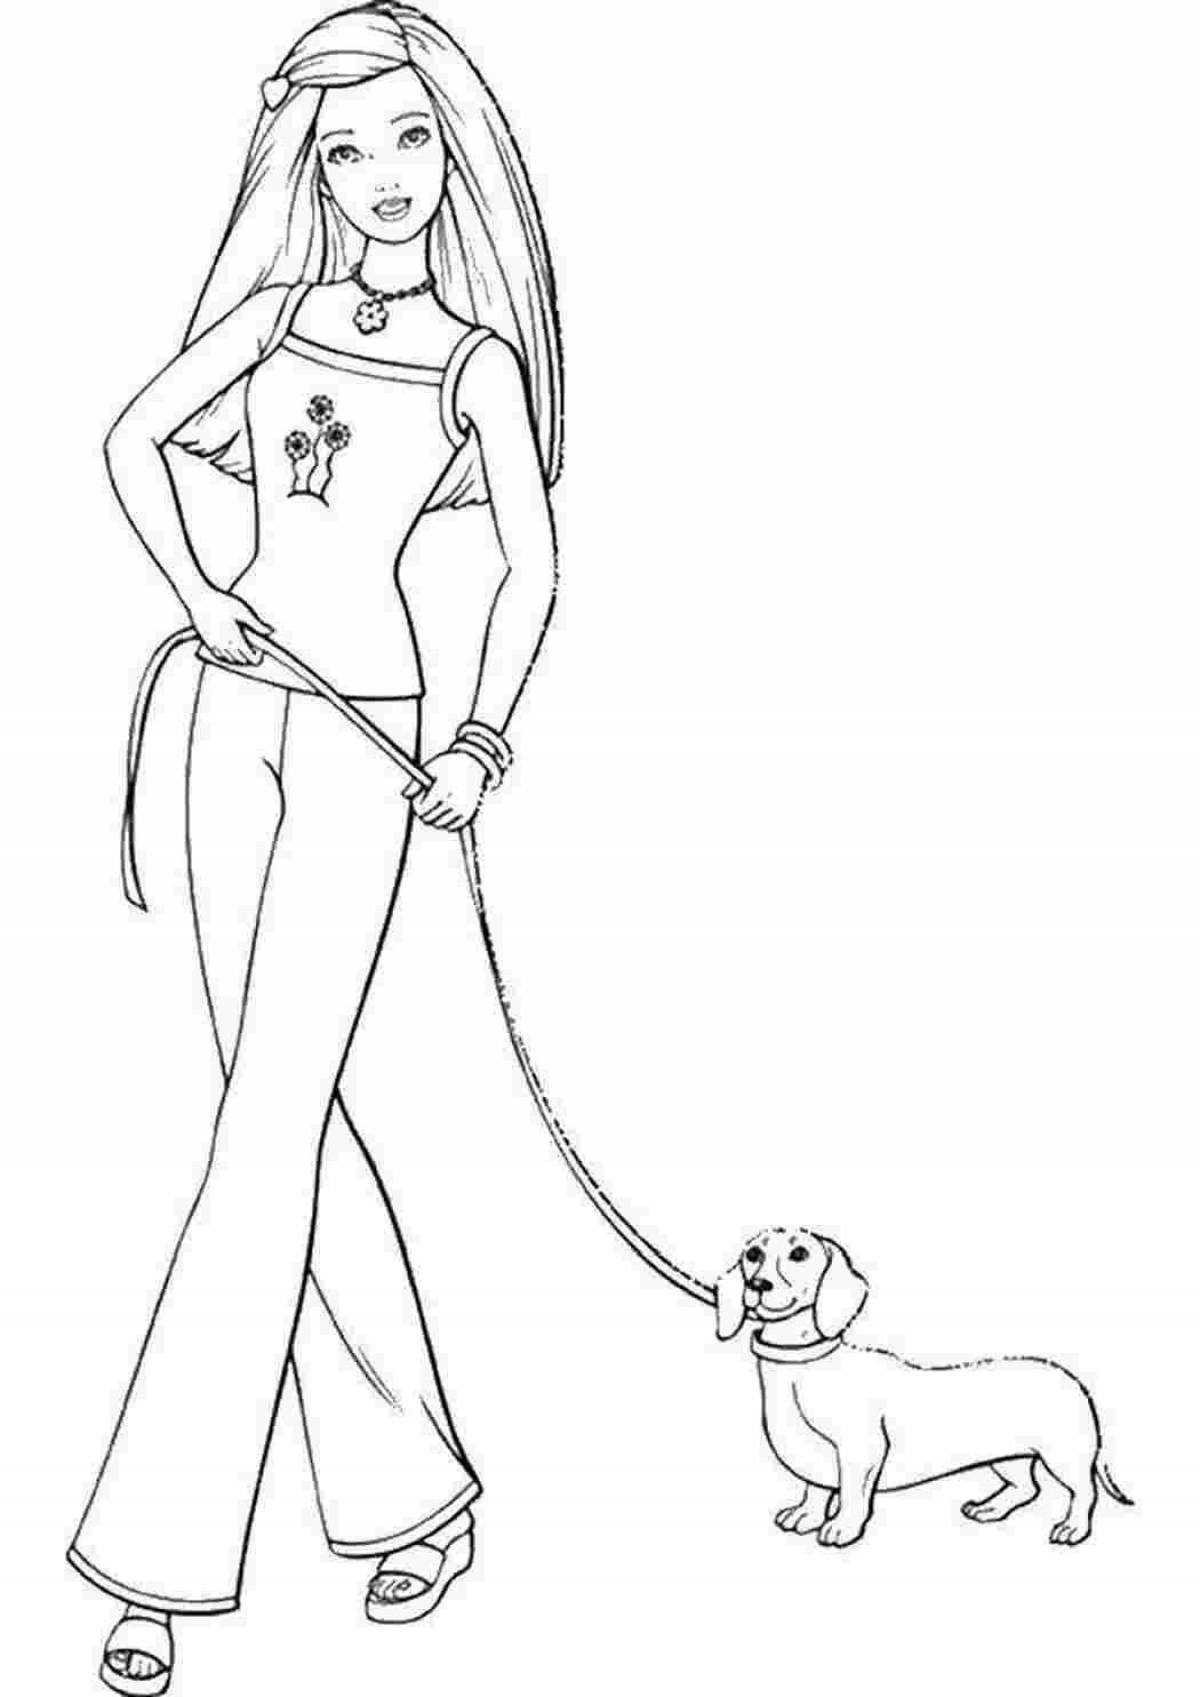 Coloring book shining barbie with animals